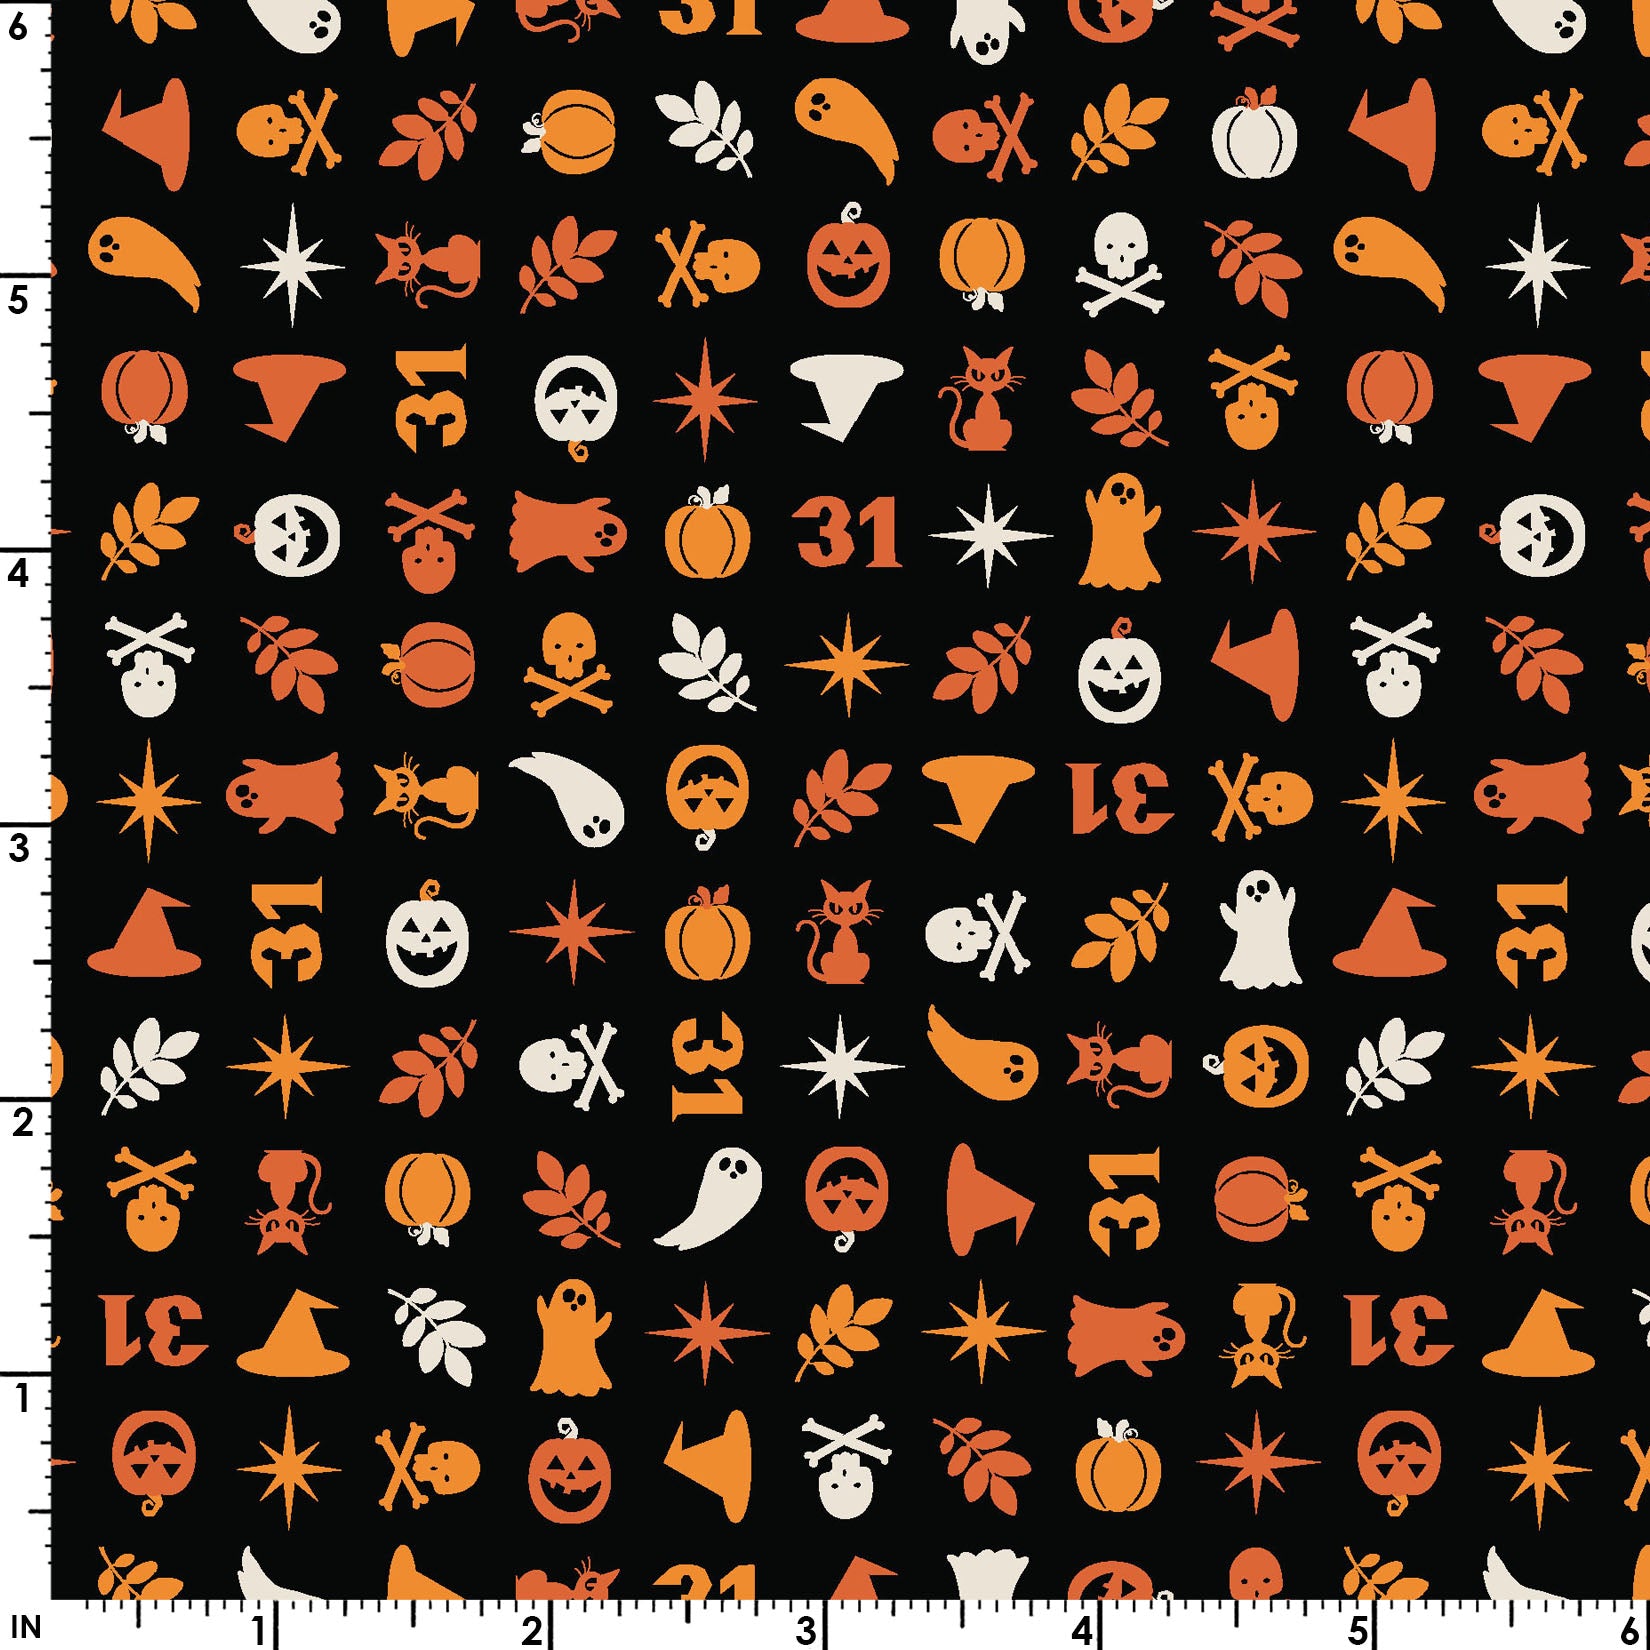 The Halloween Charms print in black (MAS10573-J) from the Pumpkin and Potions line by Kimberbell for Maywood Studio features pumpkins, witch hats, ghosts, cats, spiders and more. Photo shows details of the designs with a ruler to show the scale.